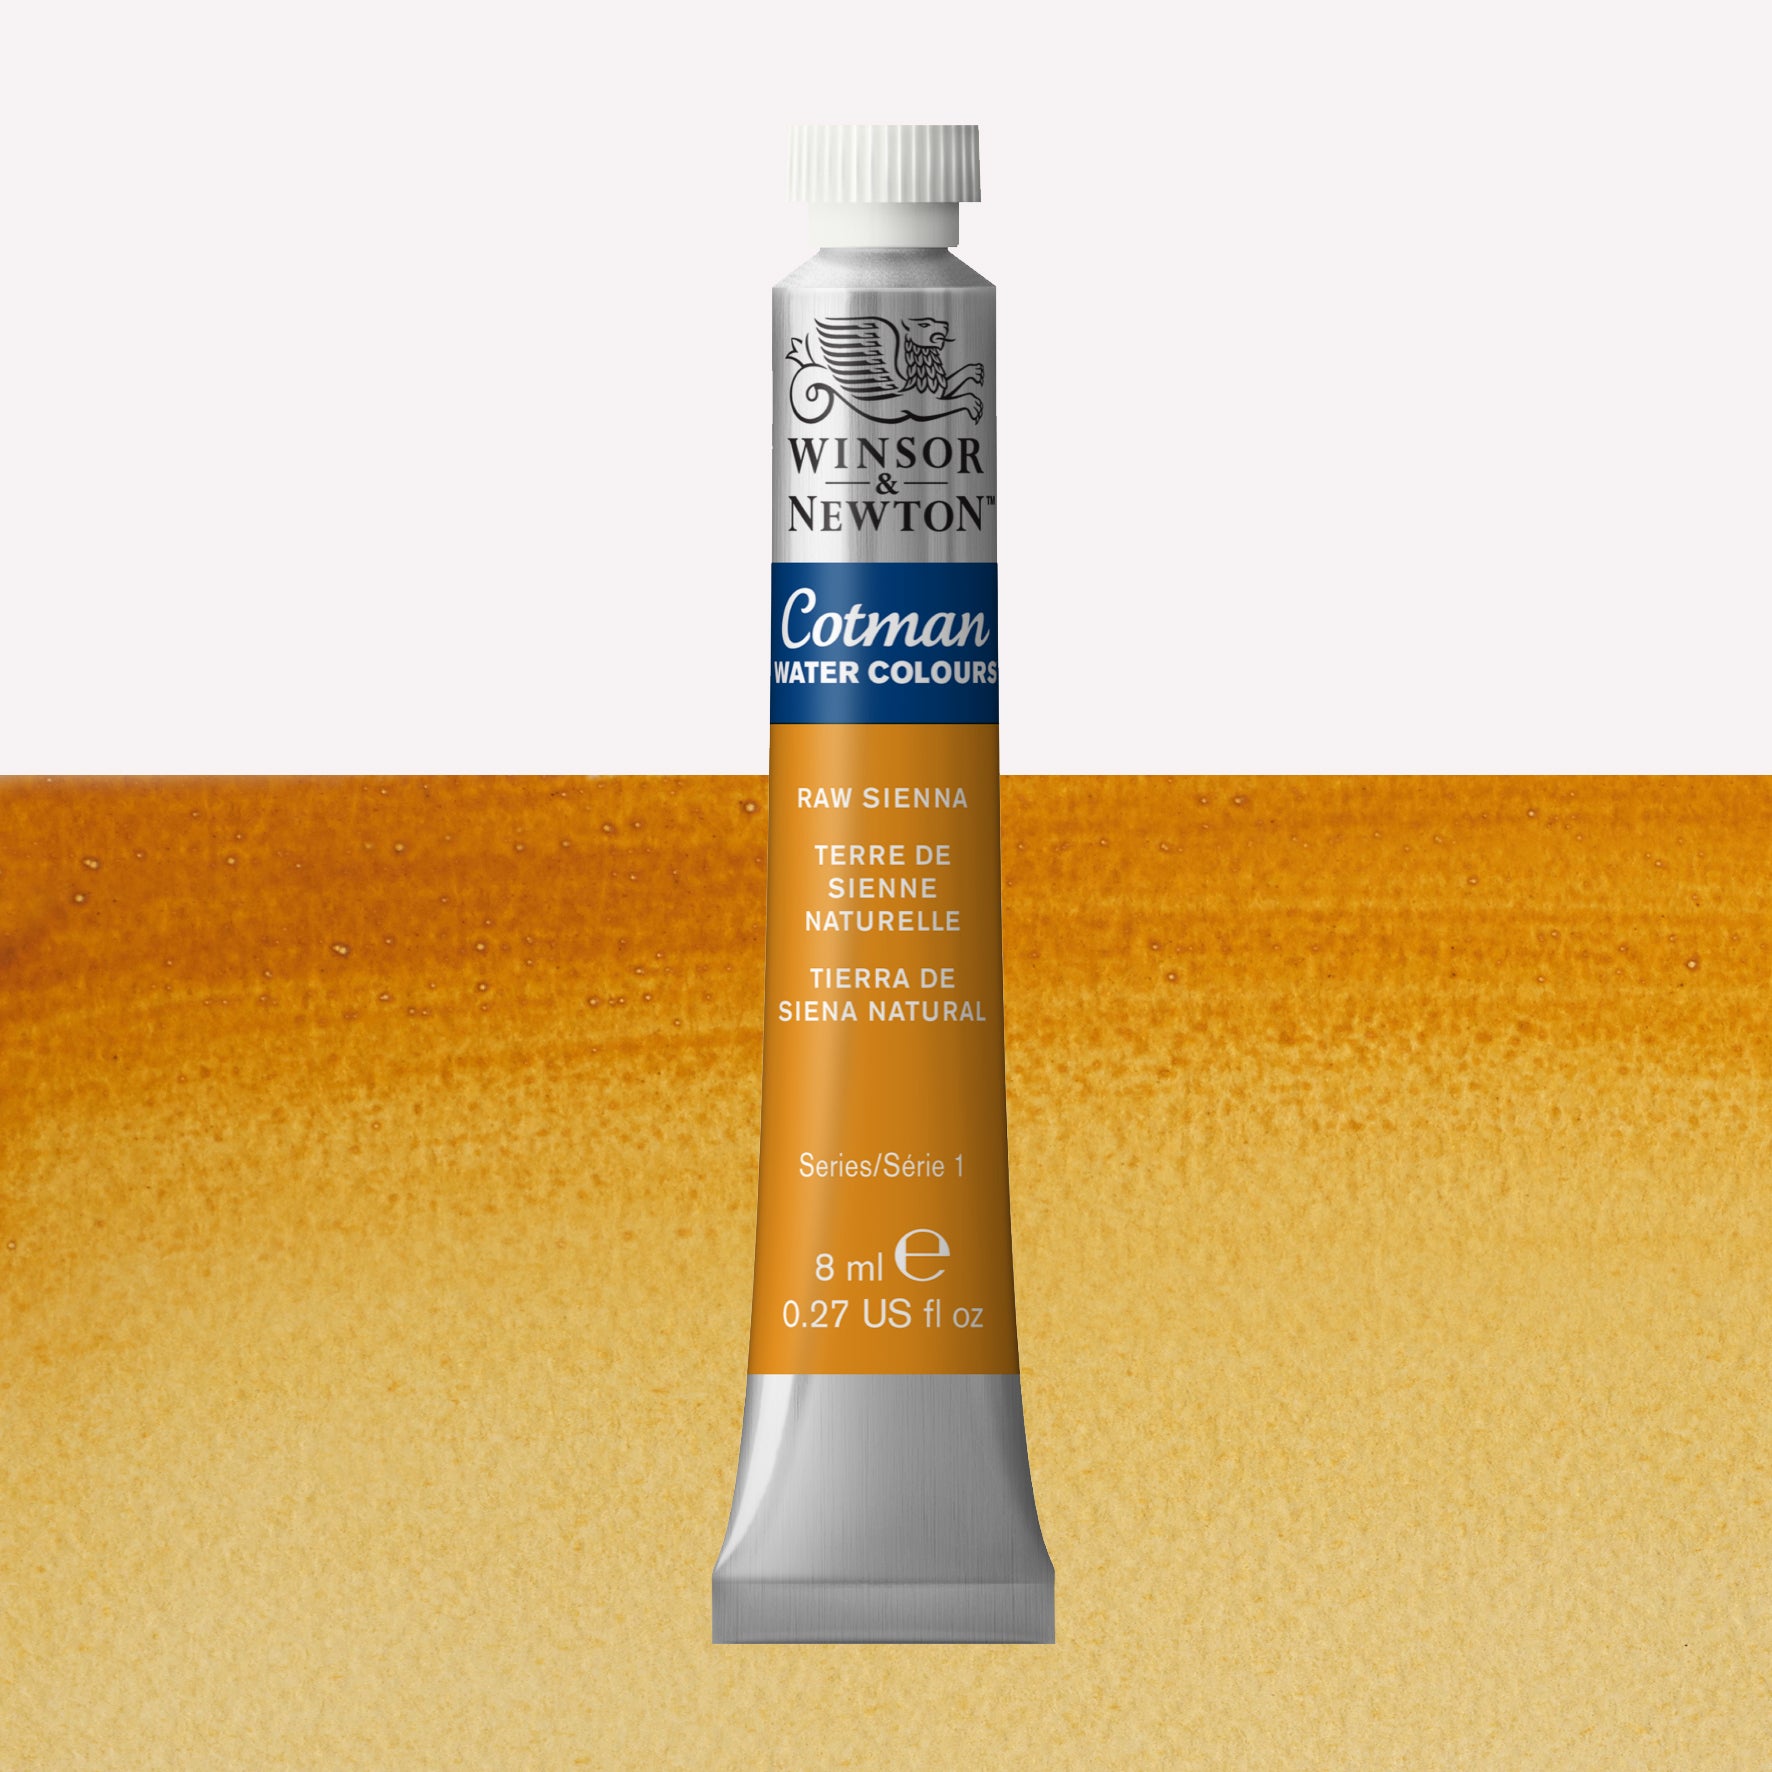 Winsor & Newton Cotman watercolour paint packaged in 8ml silver tube with a white lid in the shade Raw Sienna over a highly pigmented colour swatch.